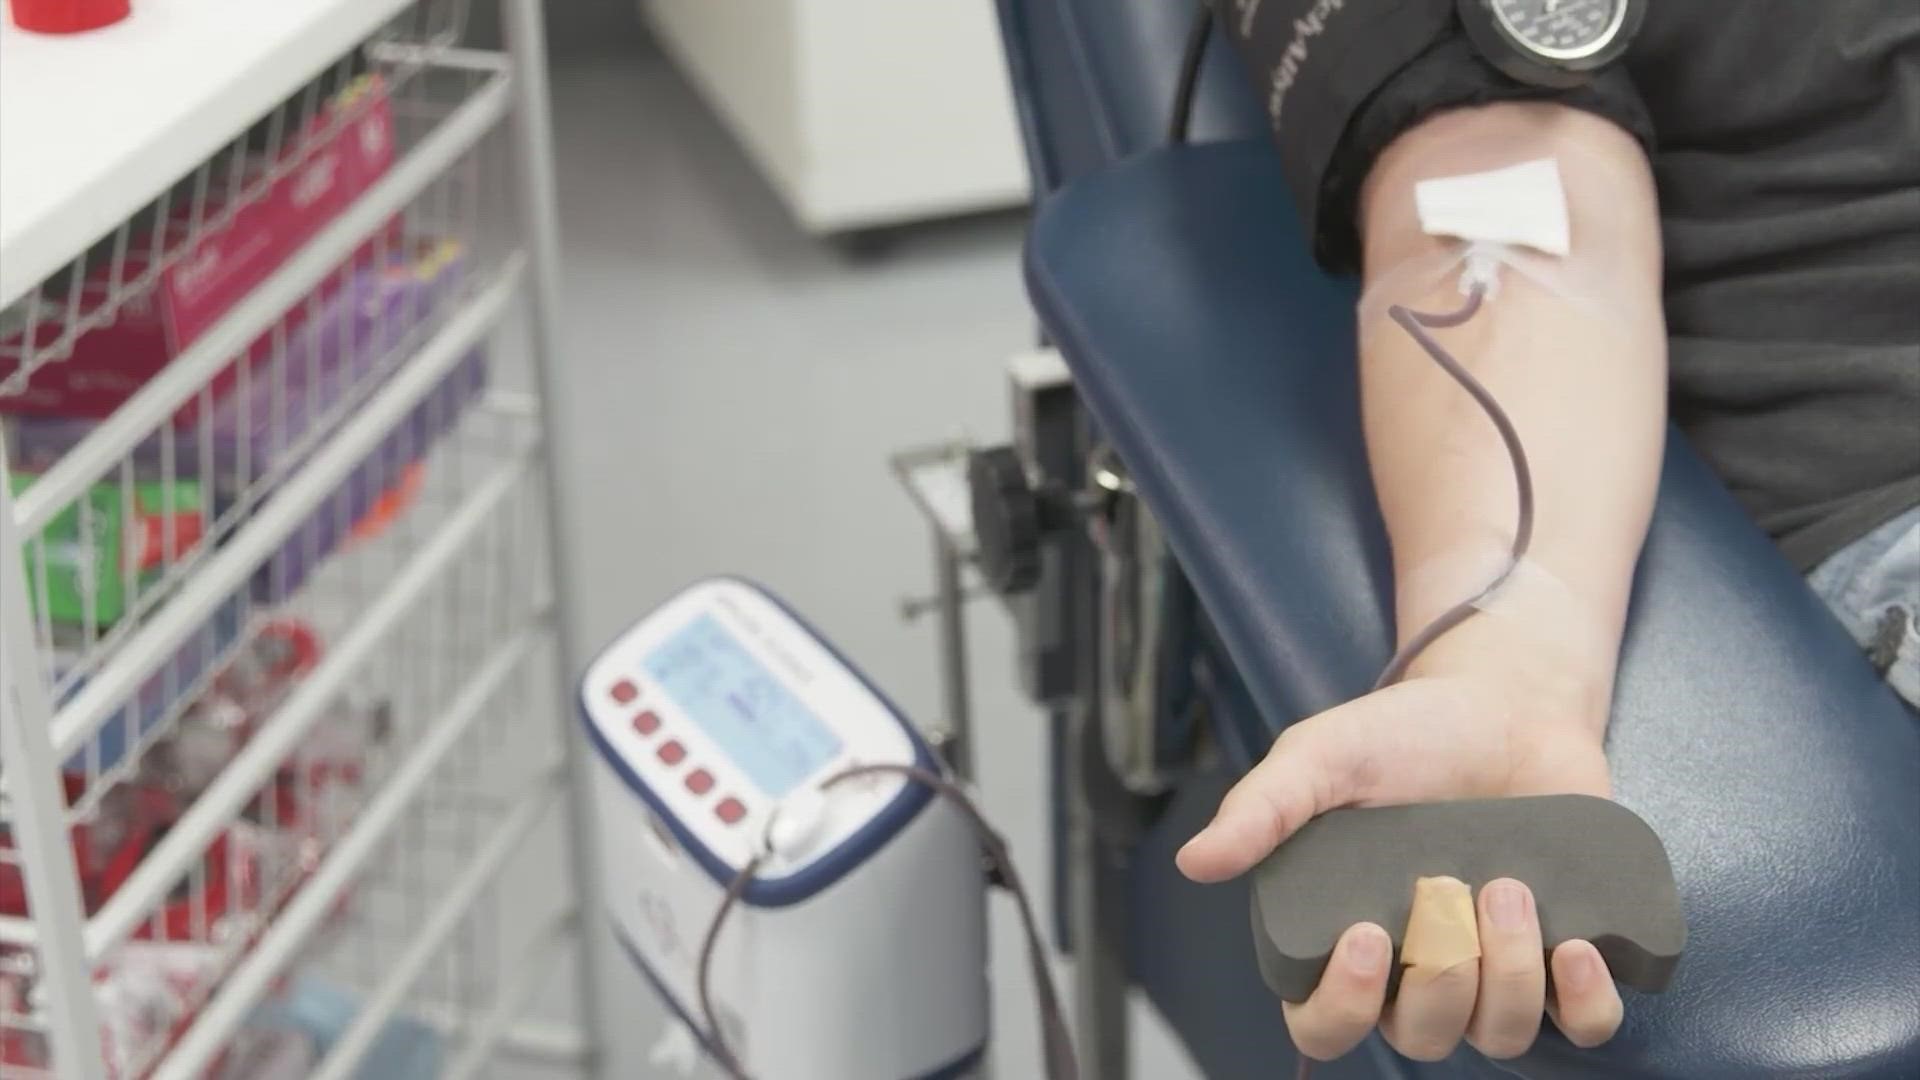 Gay and bisexual men in monogamous relationships could soon be able to donate blood for the first time in decades.